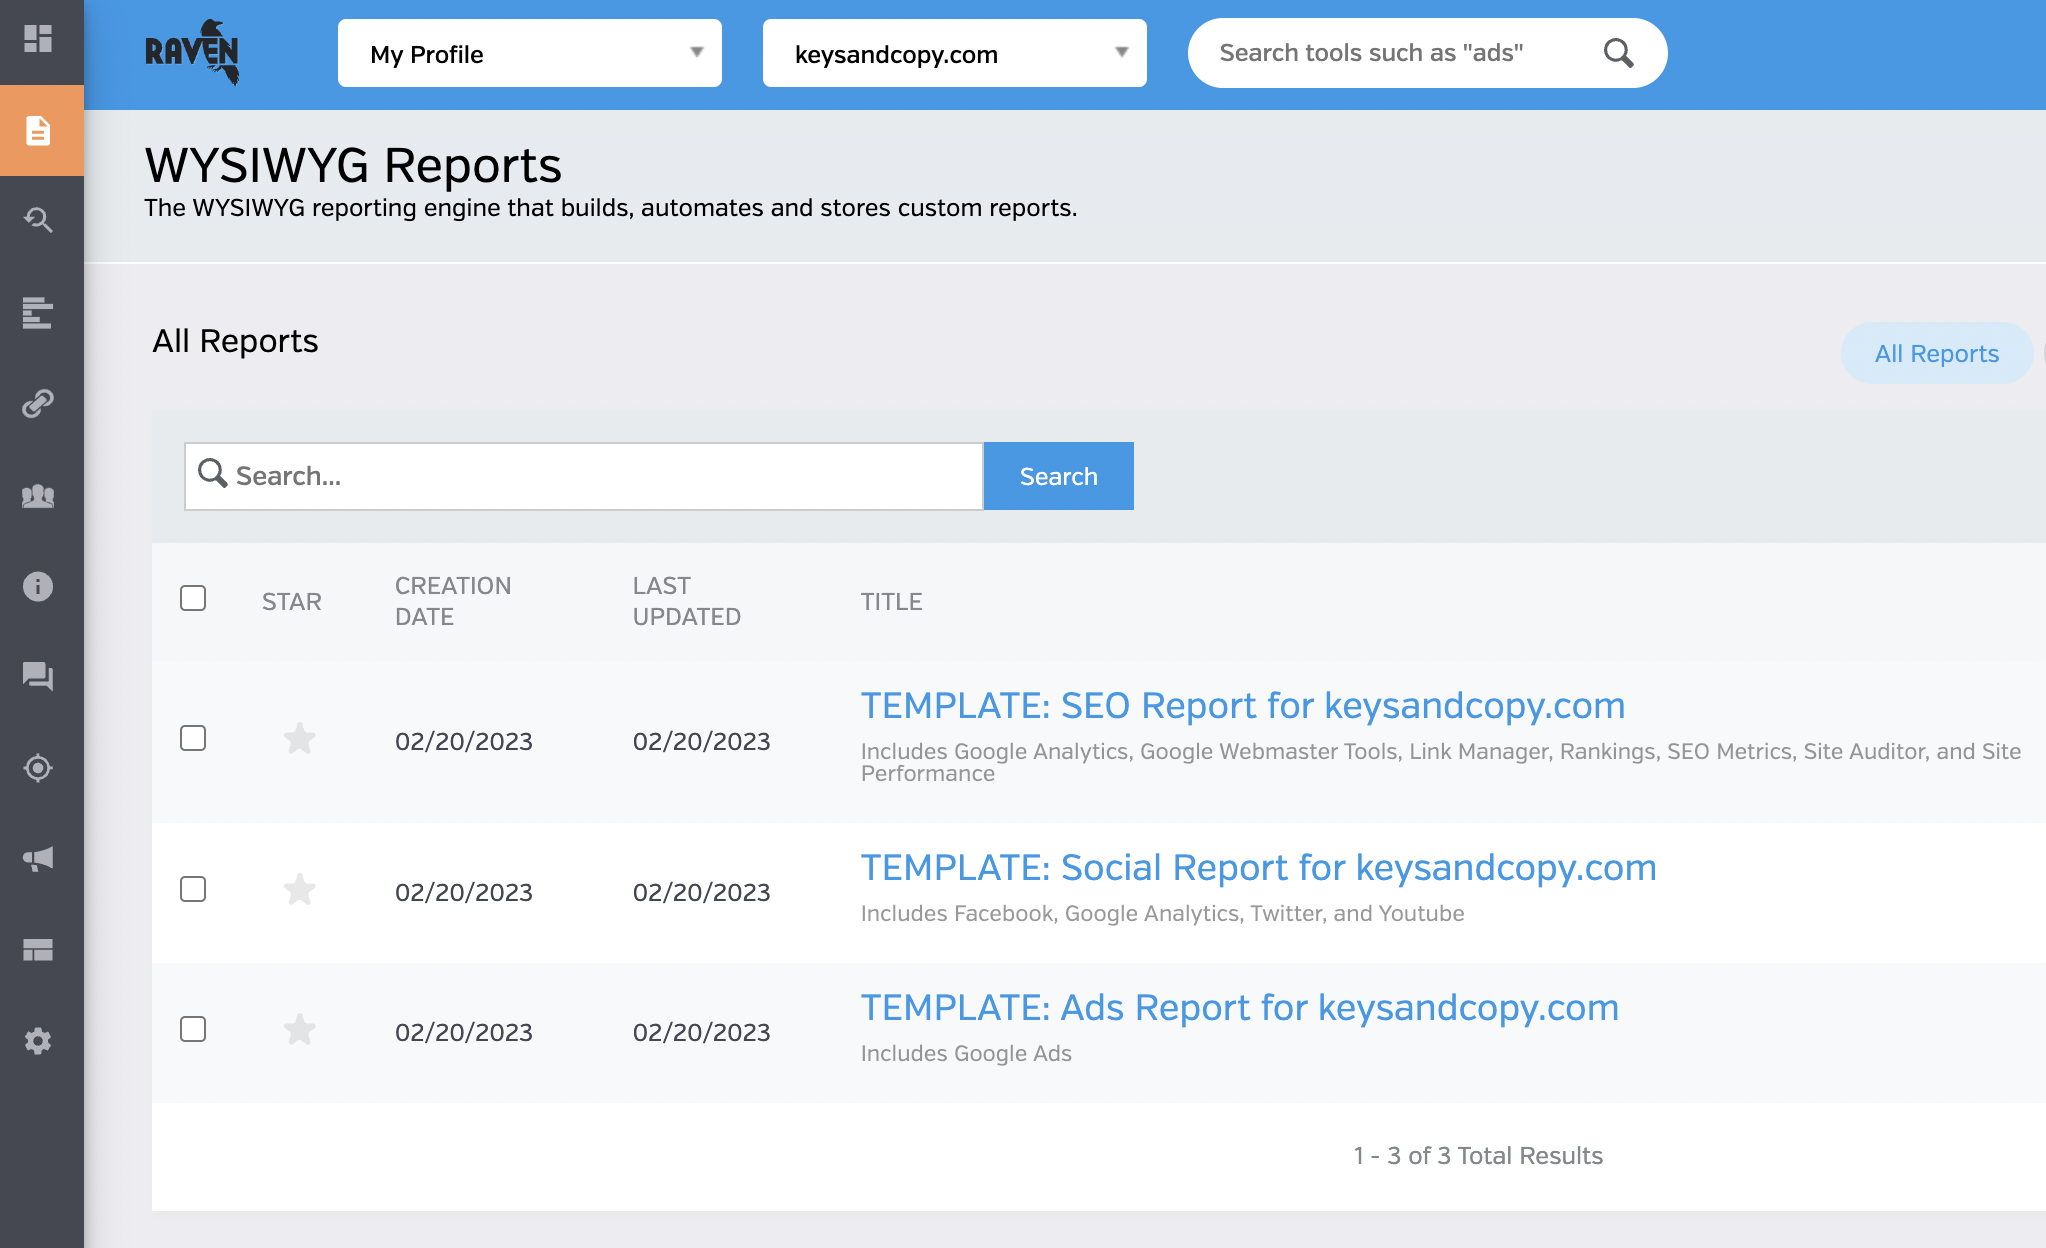 WYSIWYG Reports by Raven Tools